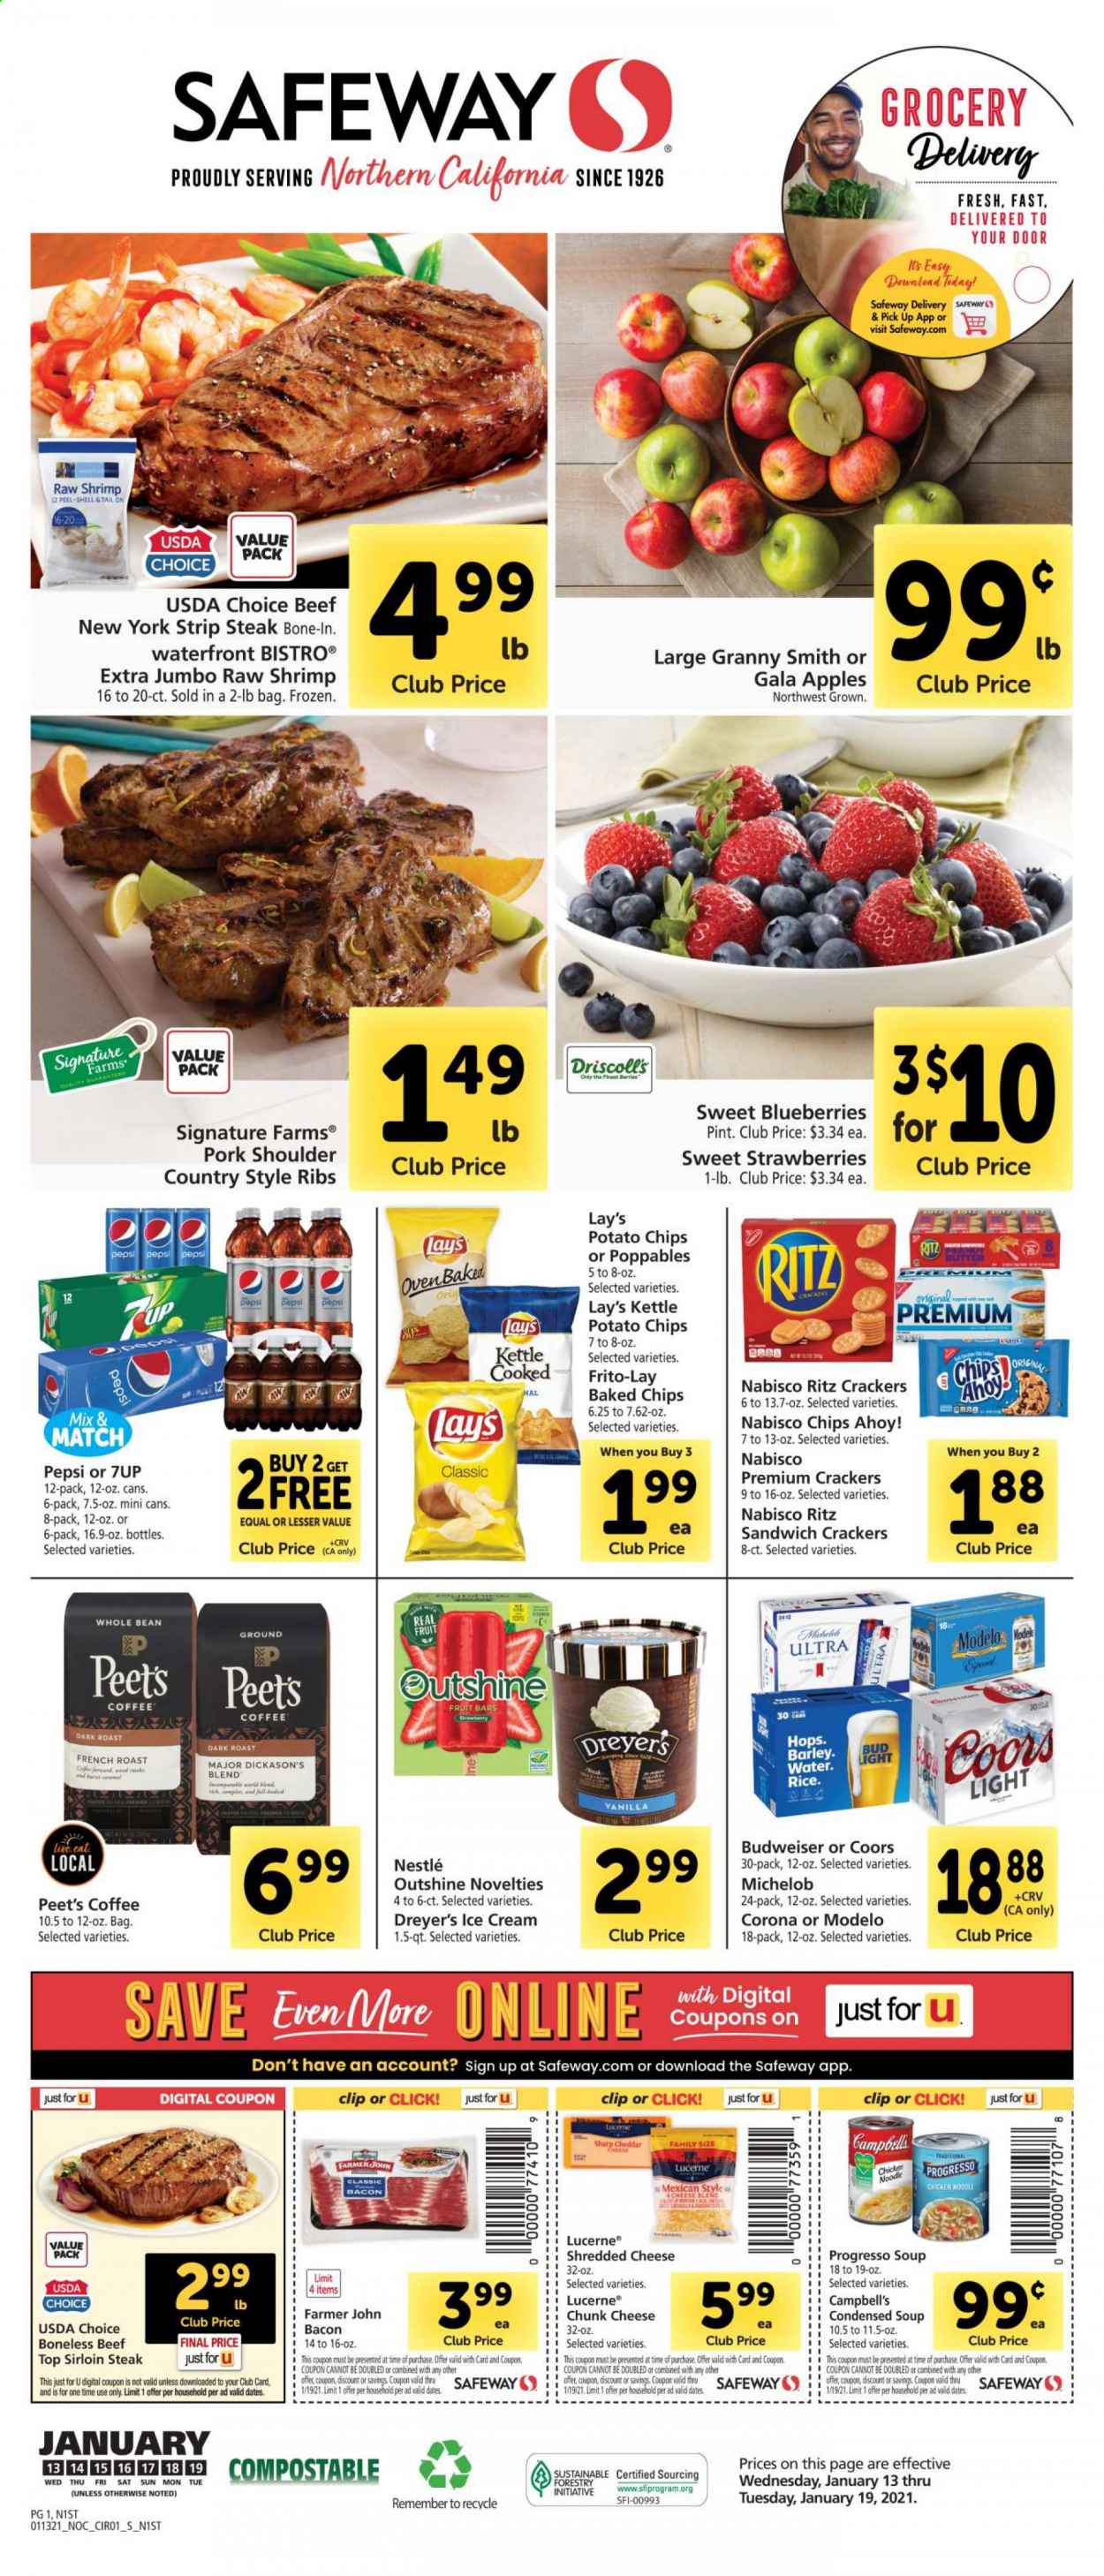 thumbnail - Safeway Flyer - 01/13/2021 - 01/19/2021 - Sales products - blueberries, apples, beef meat, beef sirloin, steak, sirloin steak, striploin steak, pork meat, pork shoulder, country style ribs, shrimps, Campbell's, condensed soup, Progresso, bacon, shredded cheese, cheddar, chunk cheese, butter, ice cream, strawberries, Nestlé, crackers, Chips Ahoy!, RITZ, potato chips, Lay’s, Frito-Lay, noodles, dried dates, Pepsi, 7UP, beer, Budweiser, Coors, Michelob, Bud Light, Corona Extra, Modelo, Sharp, Gala. Page 1.